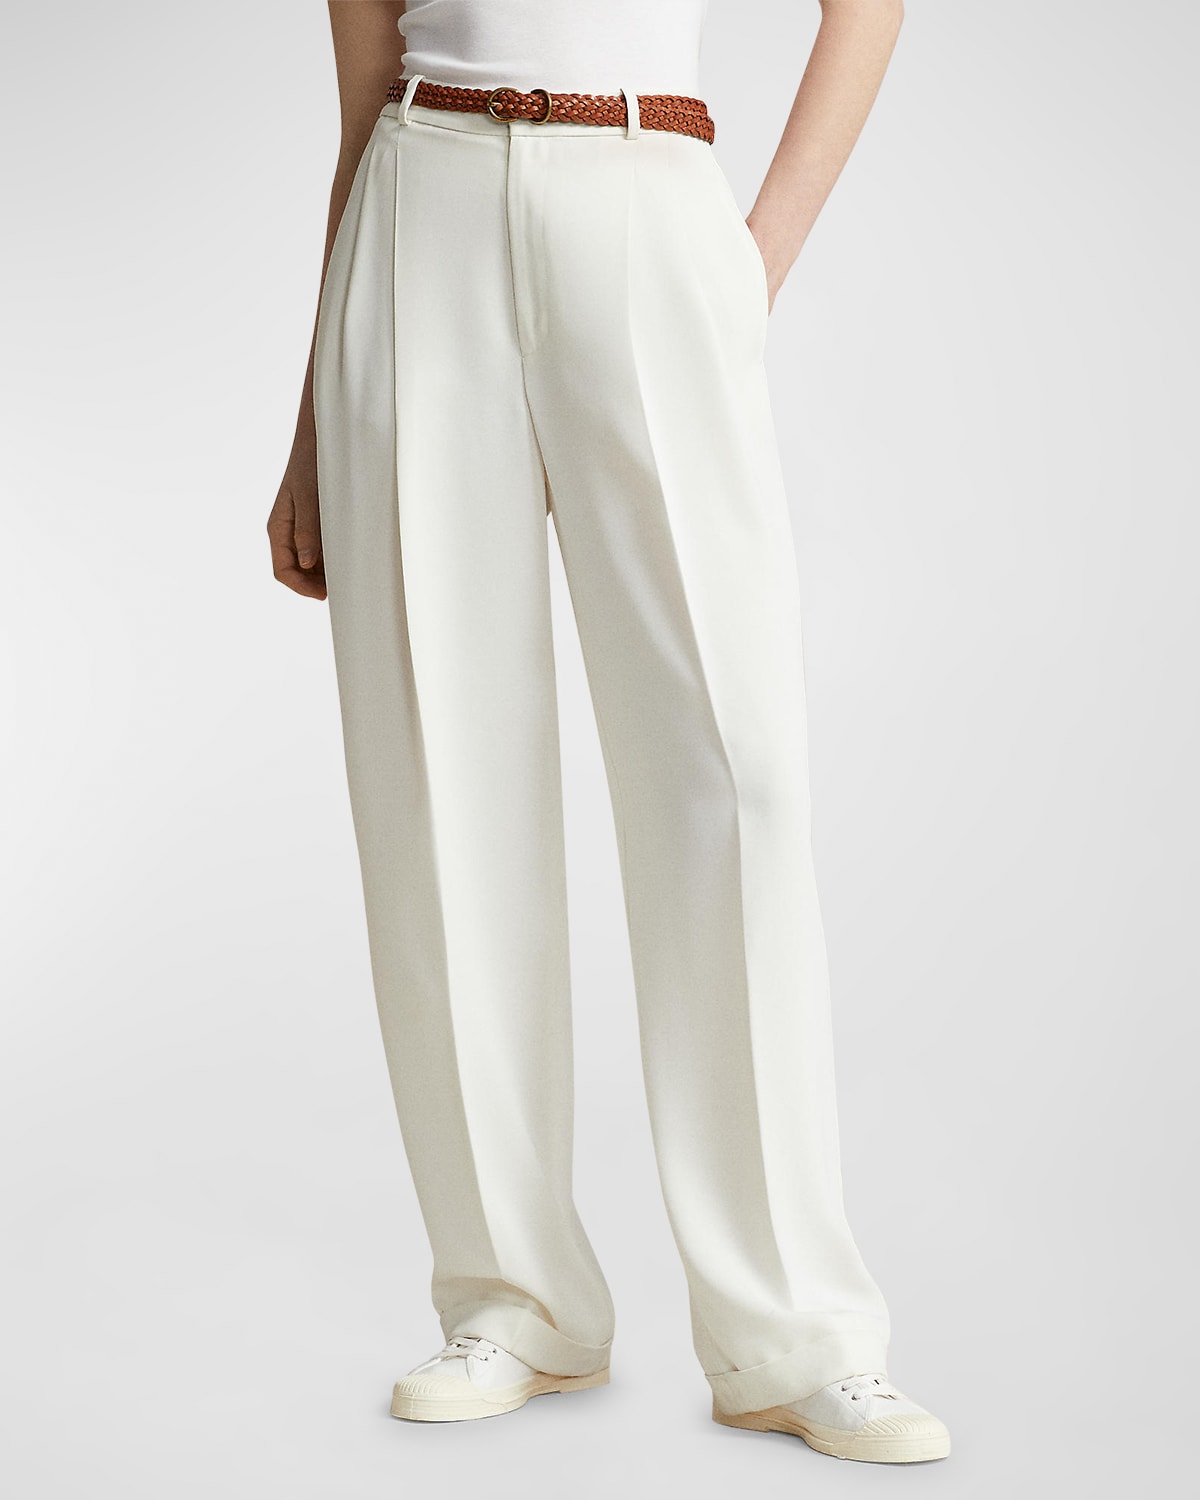 Polo Ralph Lauren Pants In Clubhouse Cream